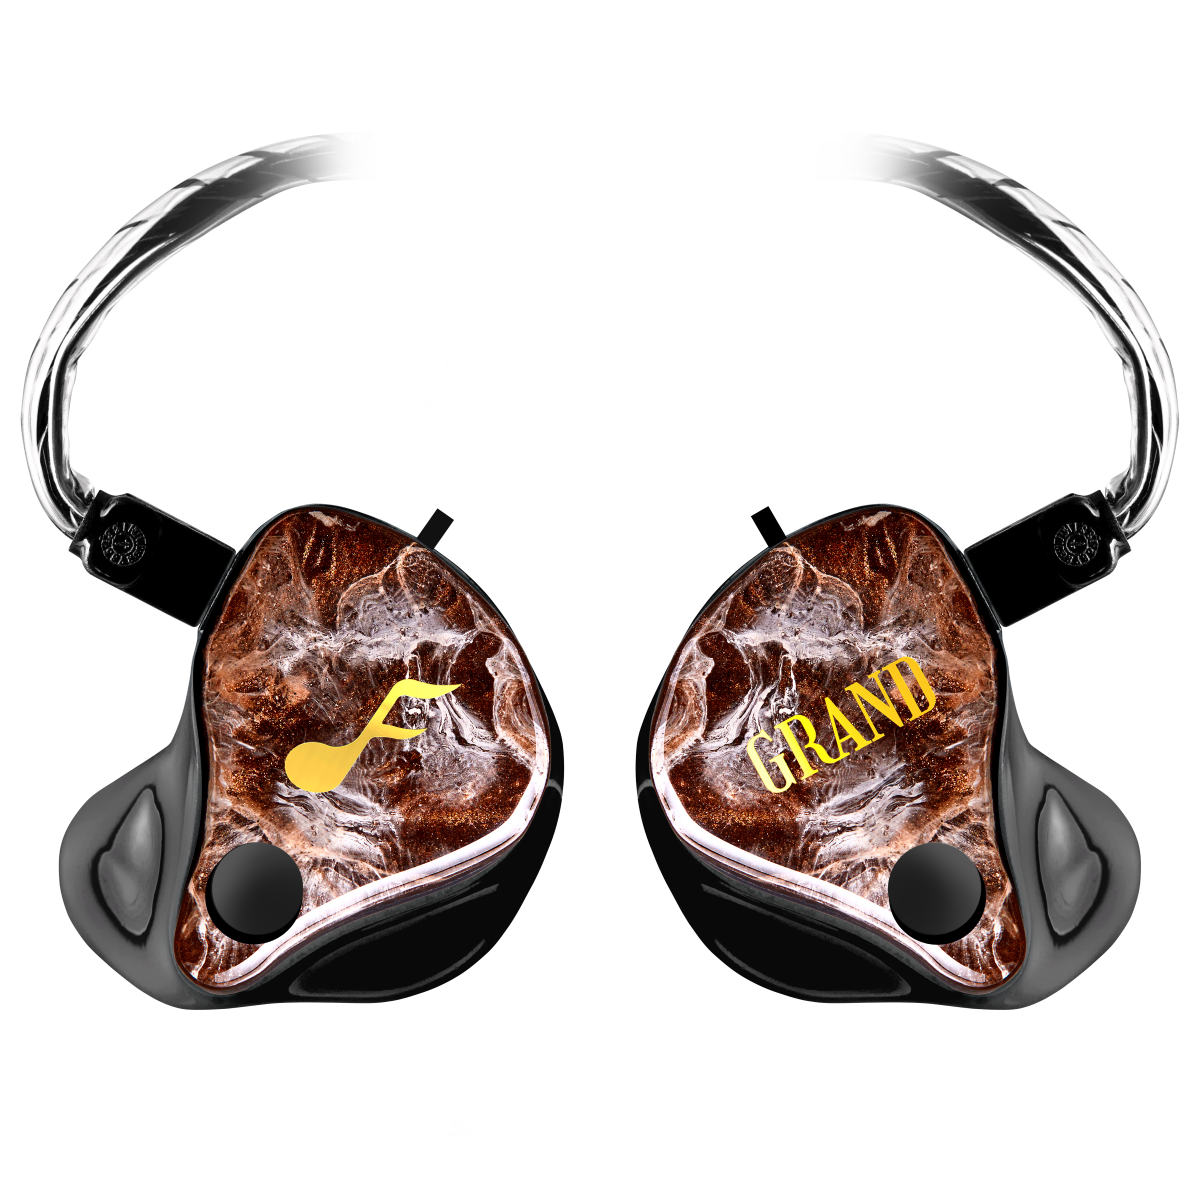 GRAND Maestro Custom IEM - Prices from 5011.00 to 5105.00